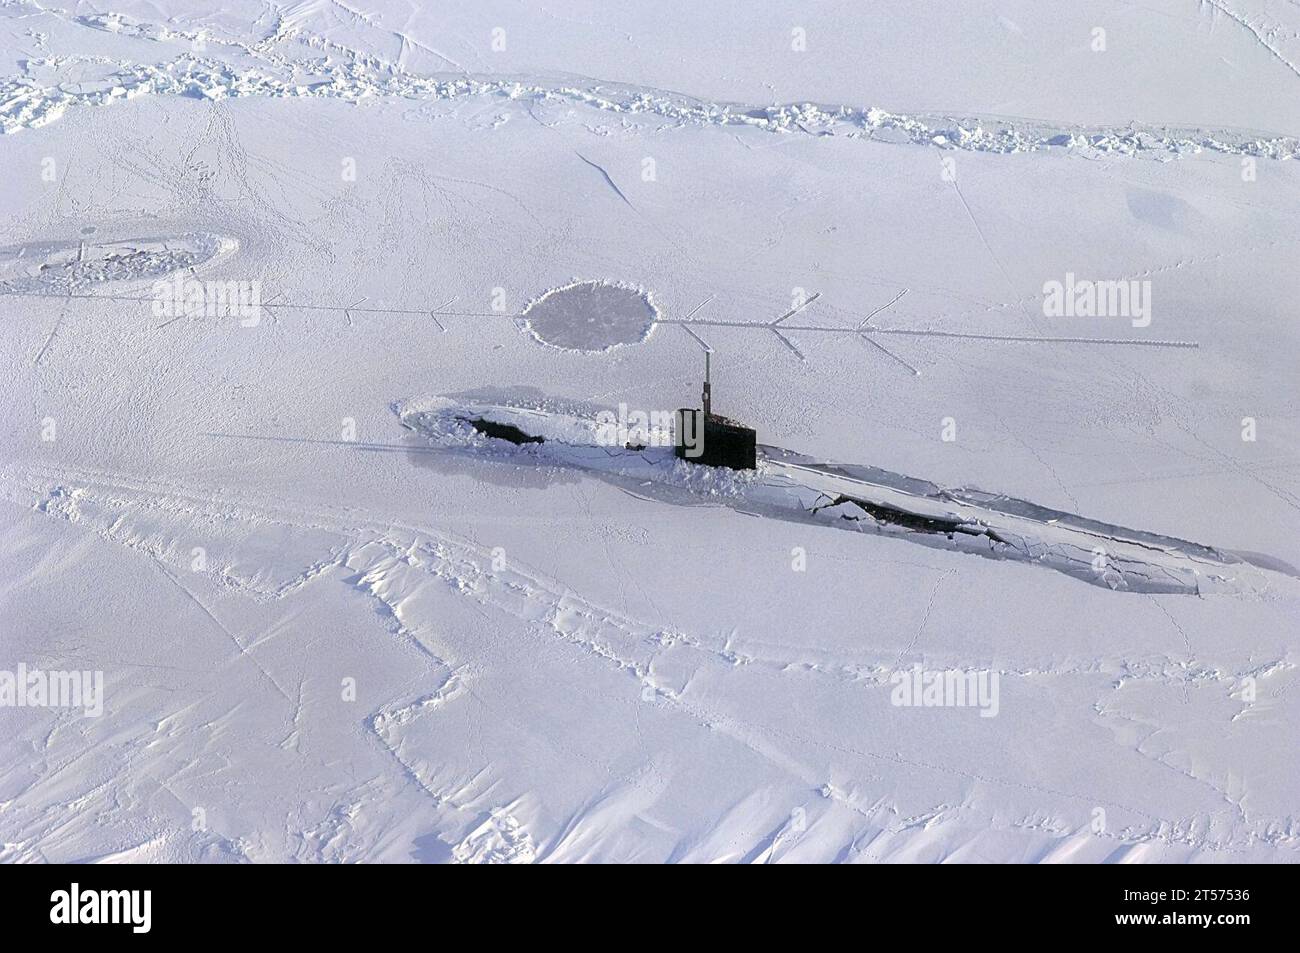 US Navy Los Angeles-class fast attack submarine USS Alexandria (SSN 757) is submerged after surfacing through two feet of ice during ICEX-07, a U.S. Navy and Royal Navy exercise.jpg Stock Photo